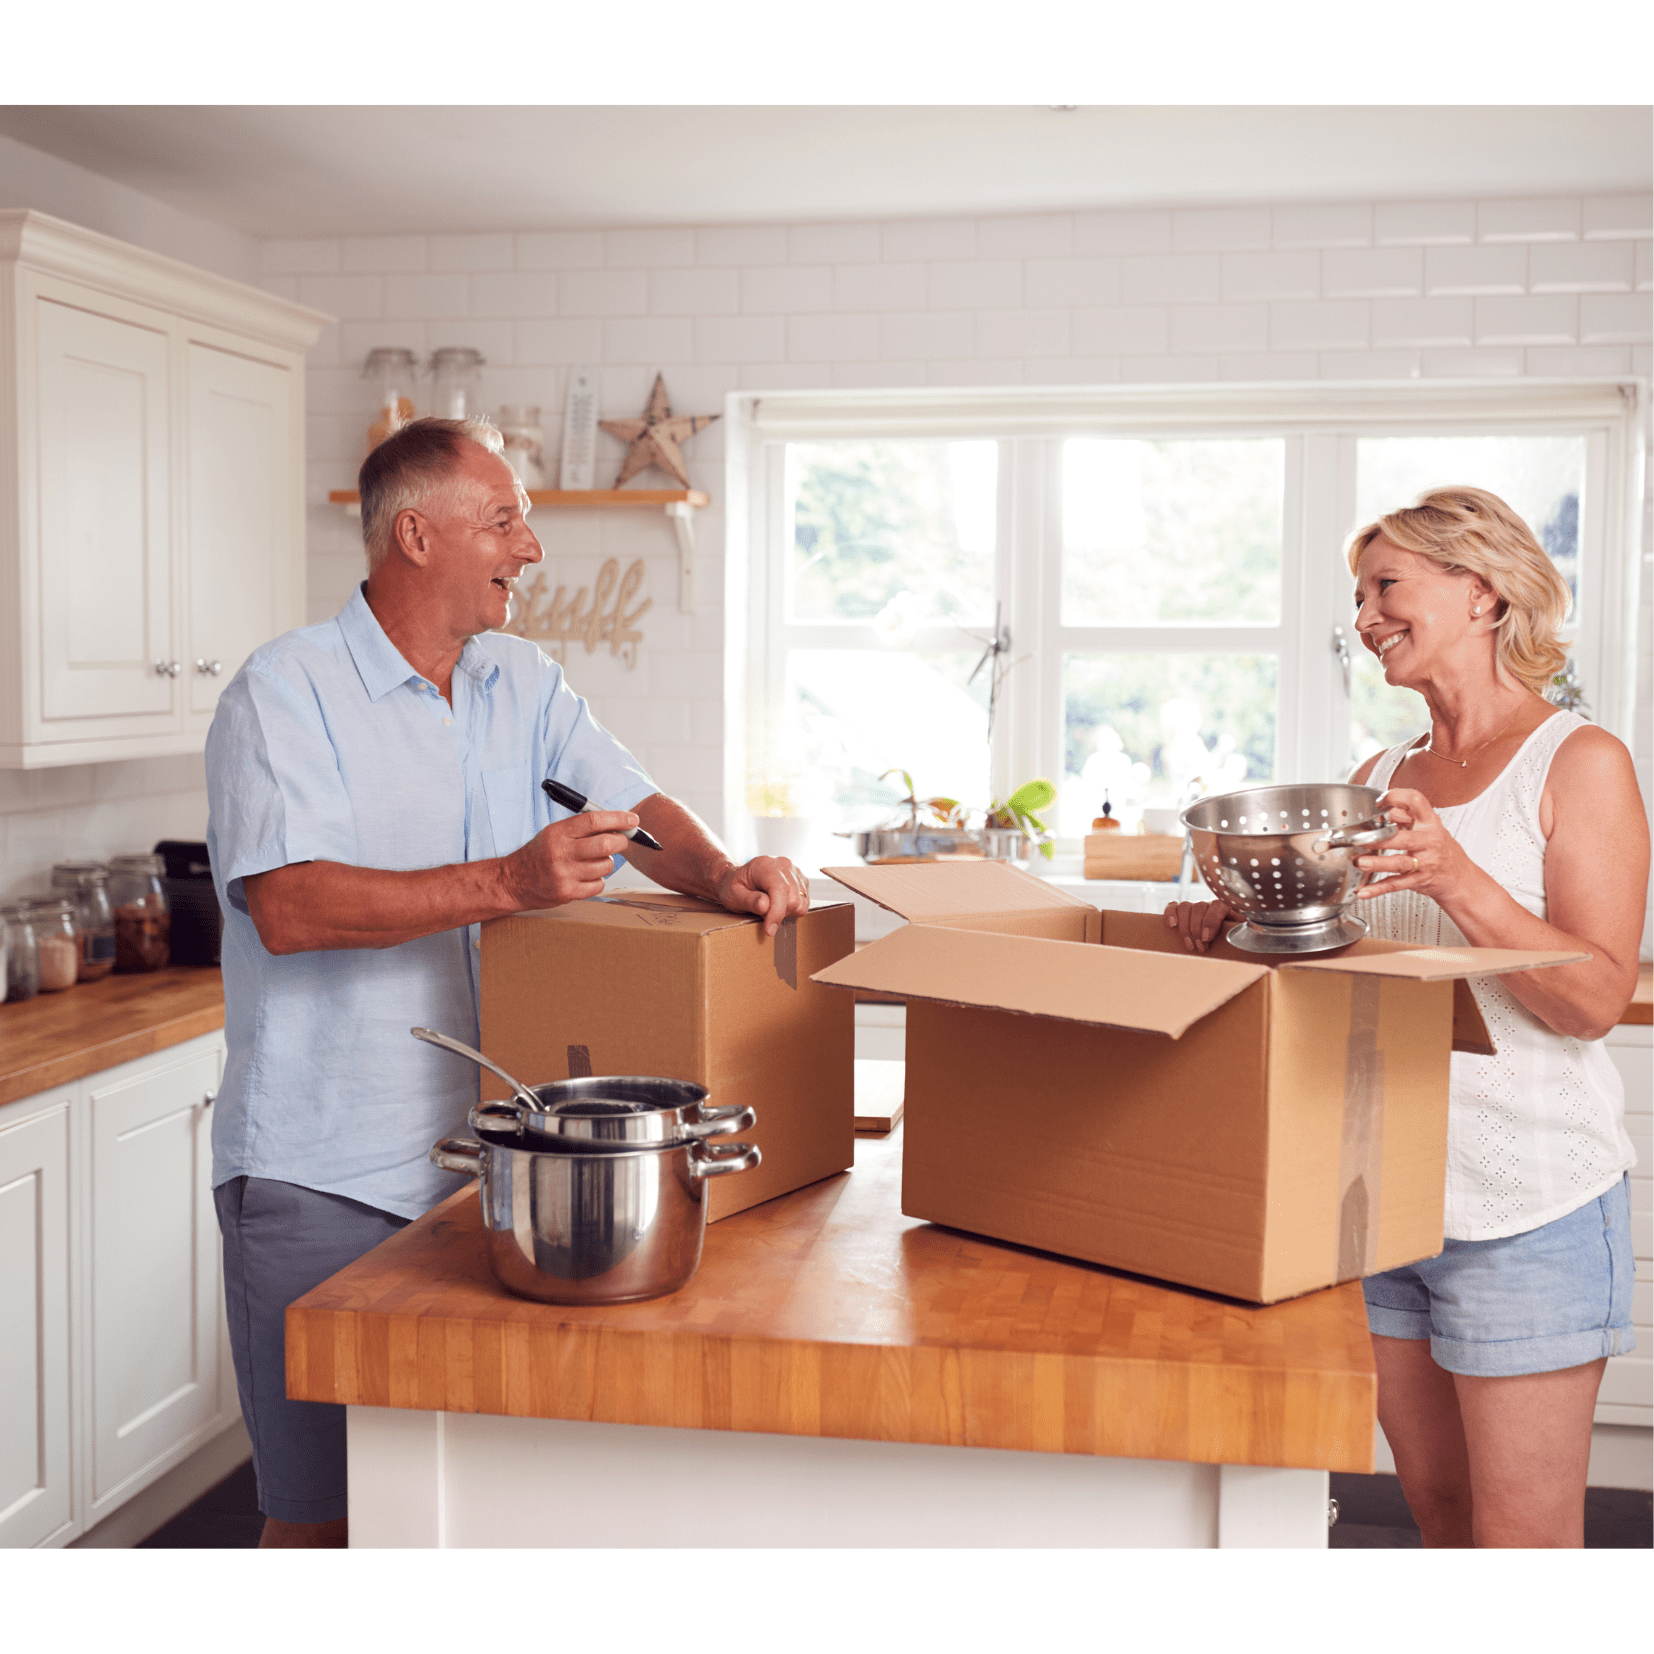 Couple in kitchen packing boxes